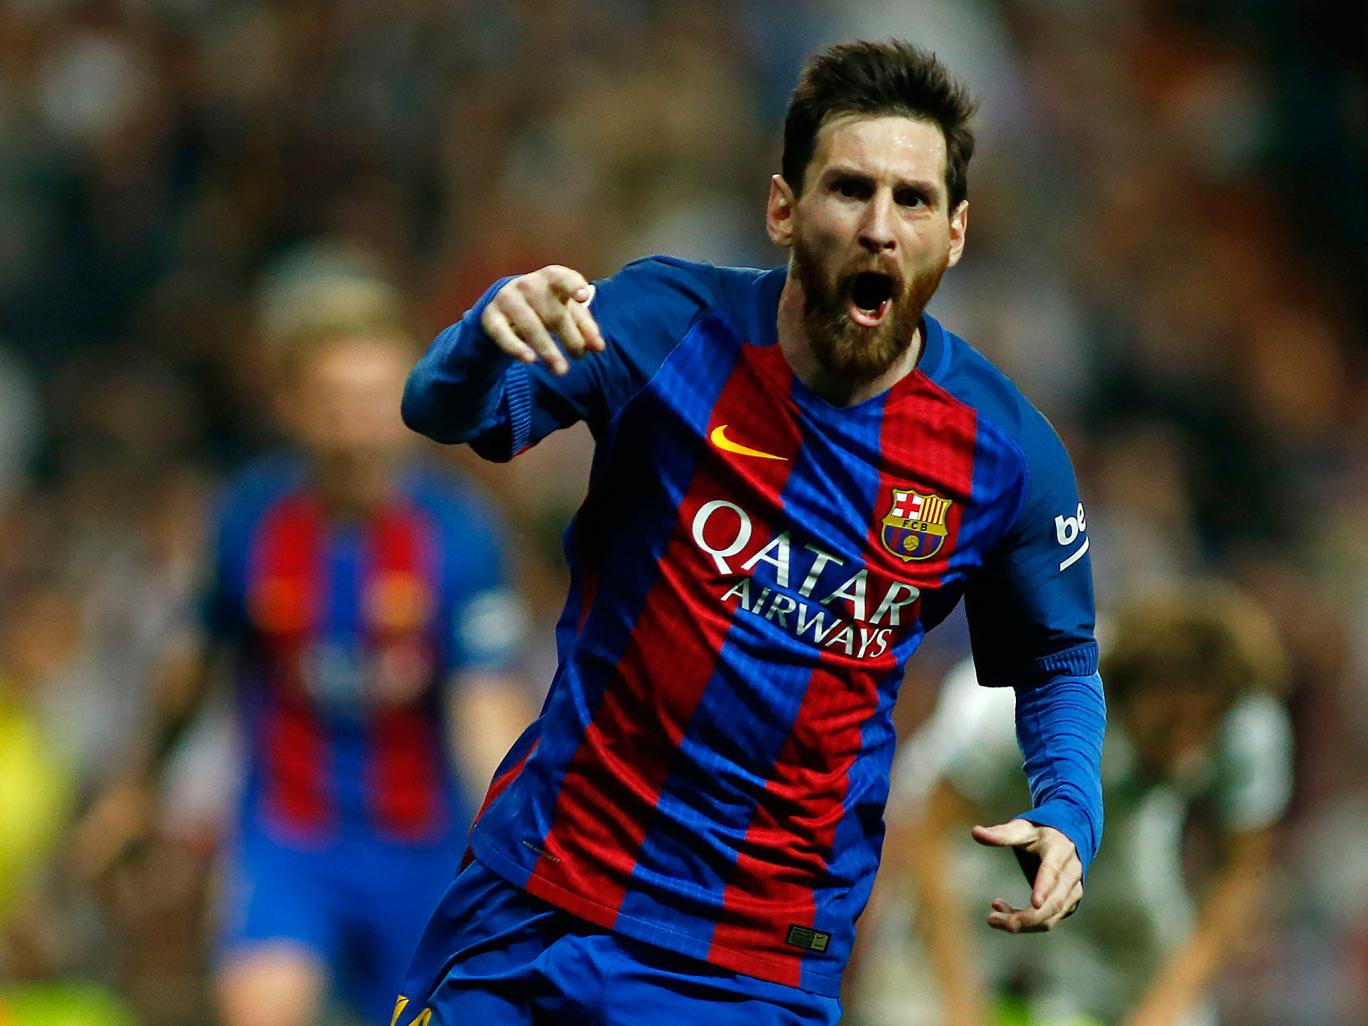 Lionel Messi Signs New Contract With Barcelona, Could Become The Highest Paid Footballer